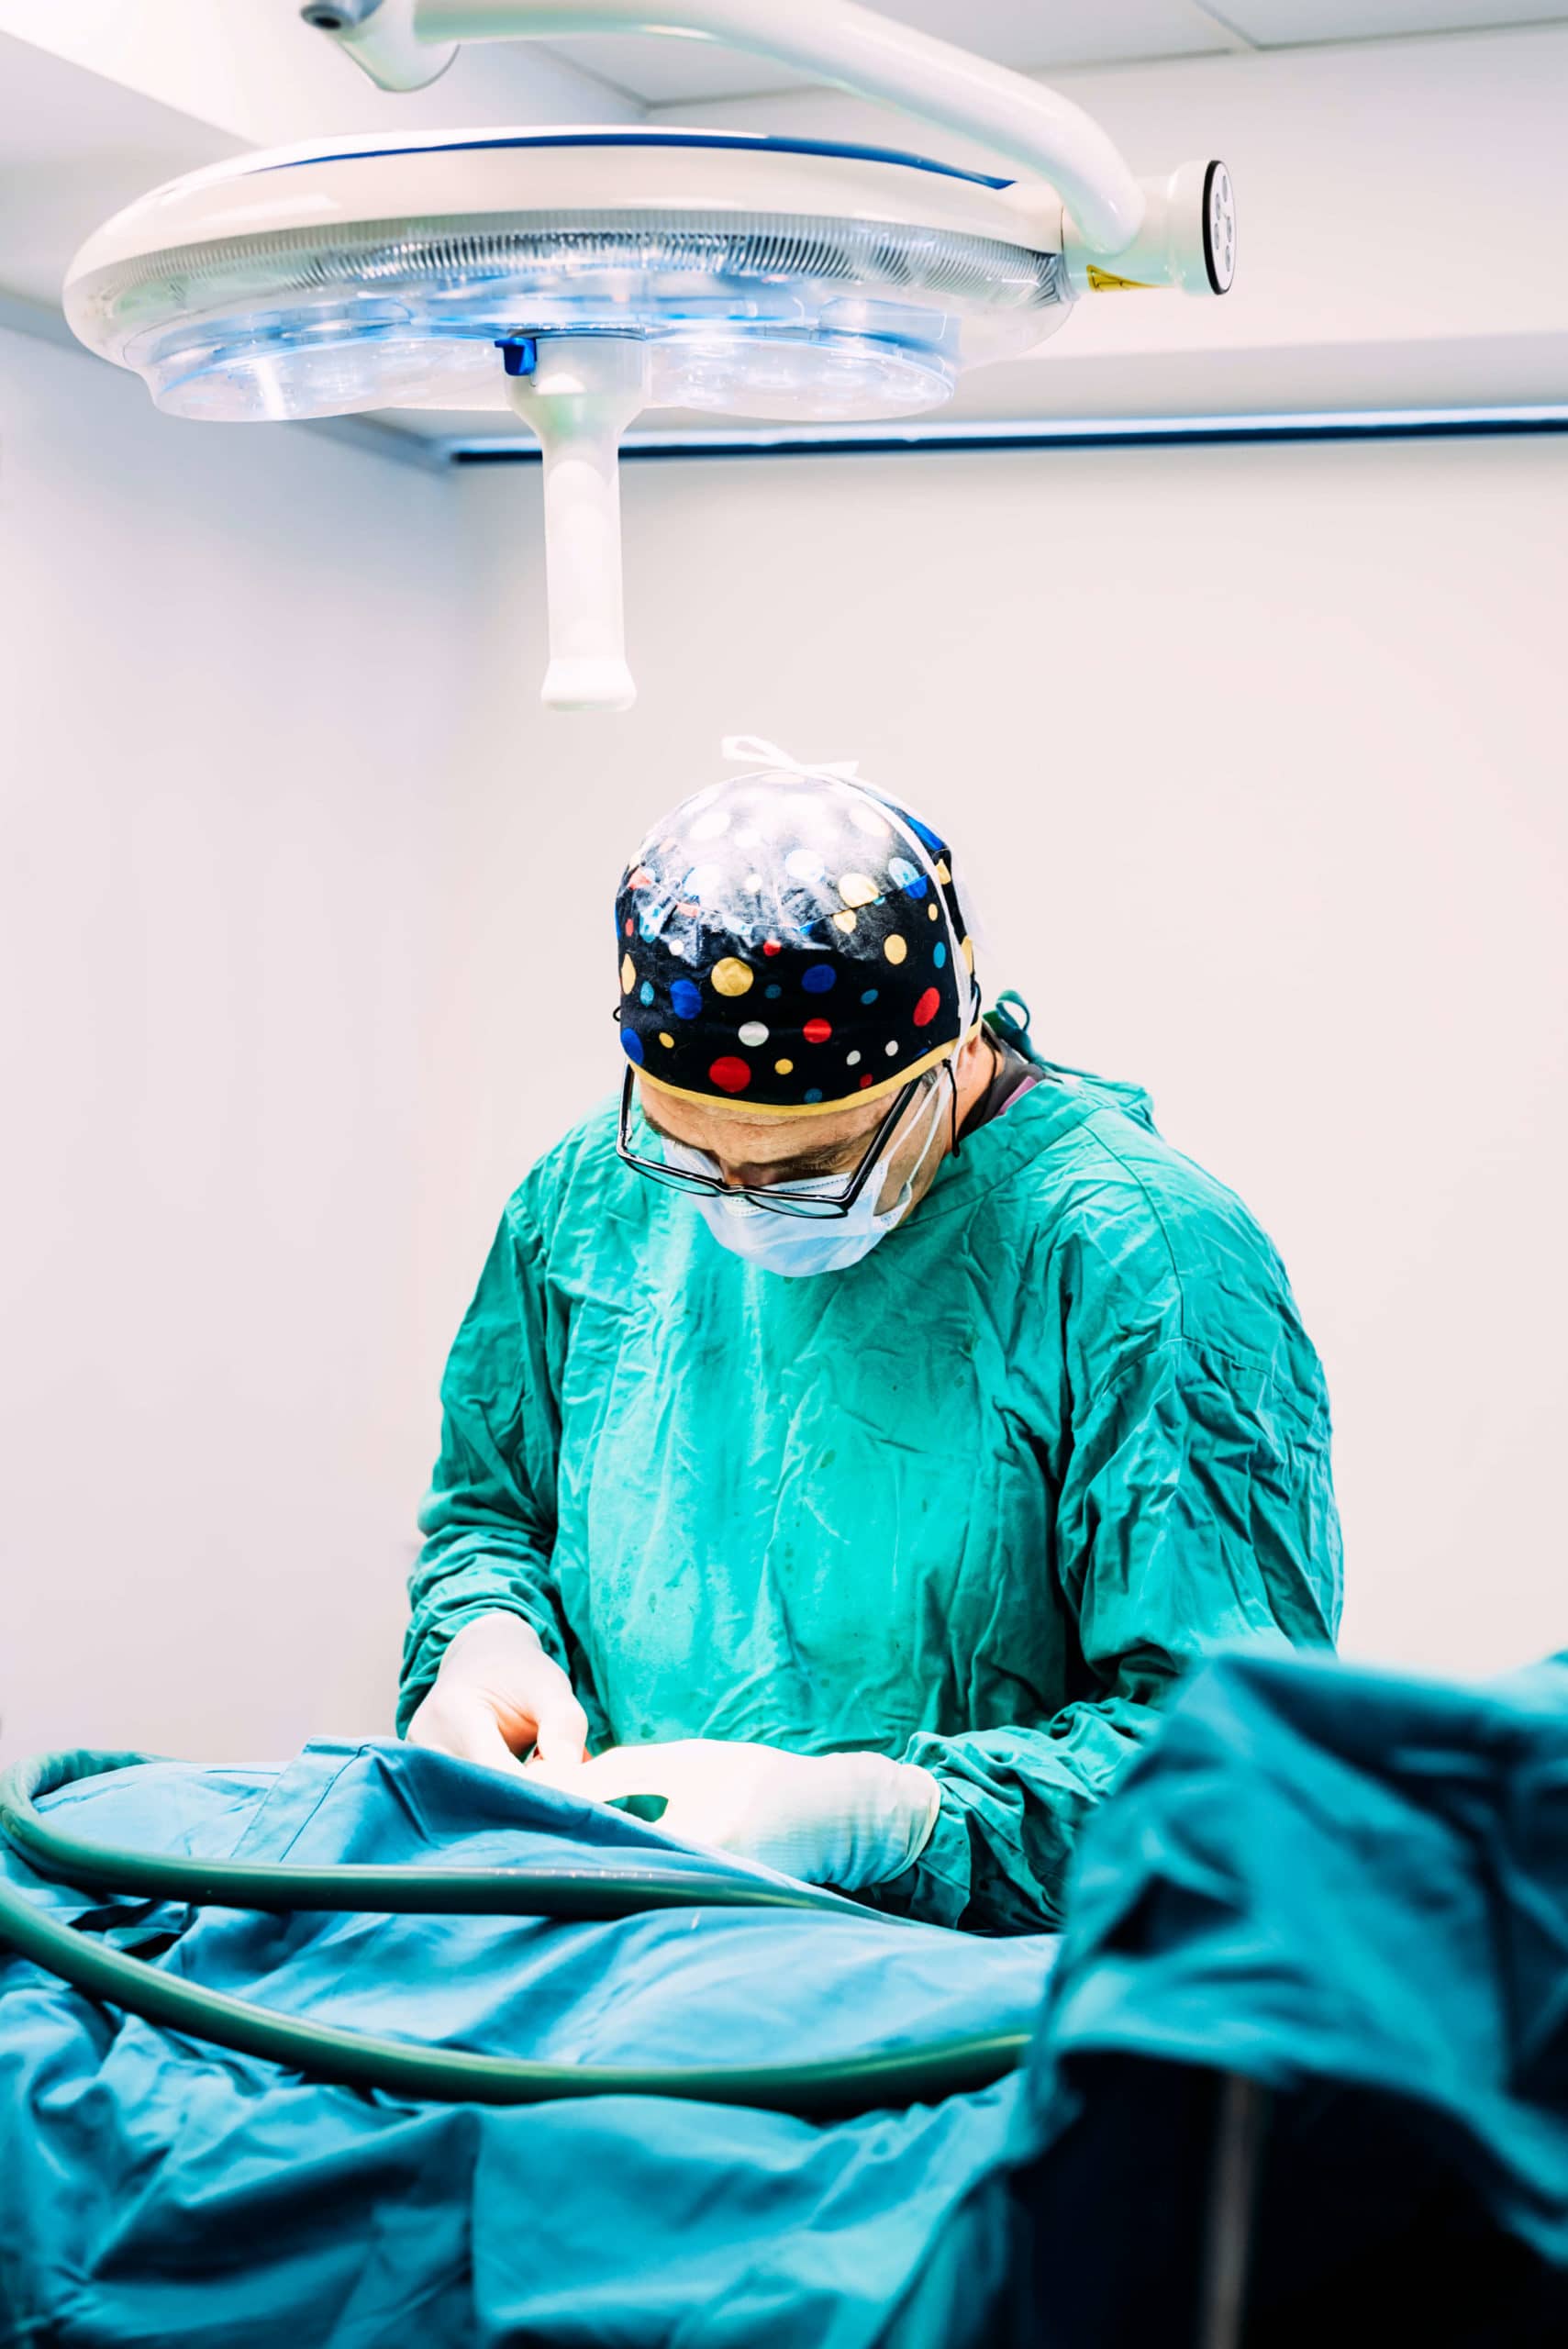 Surgeon Operating In A Hospital